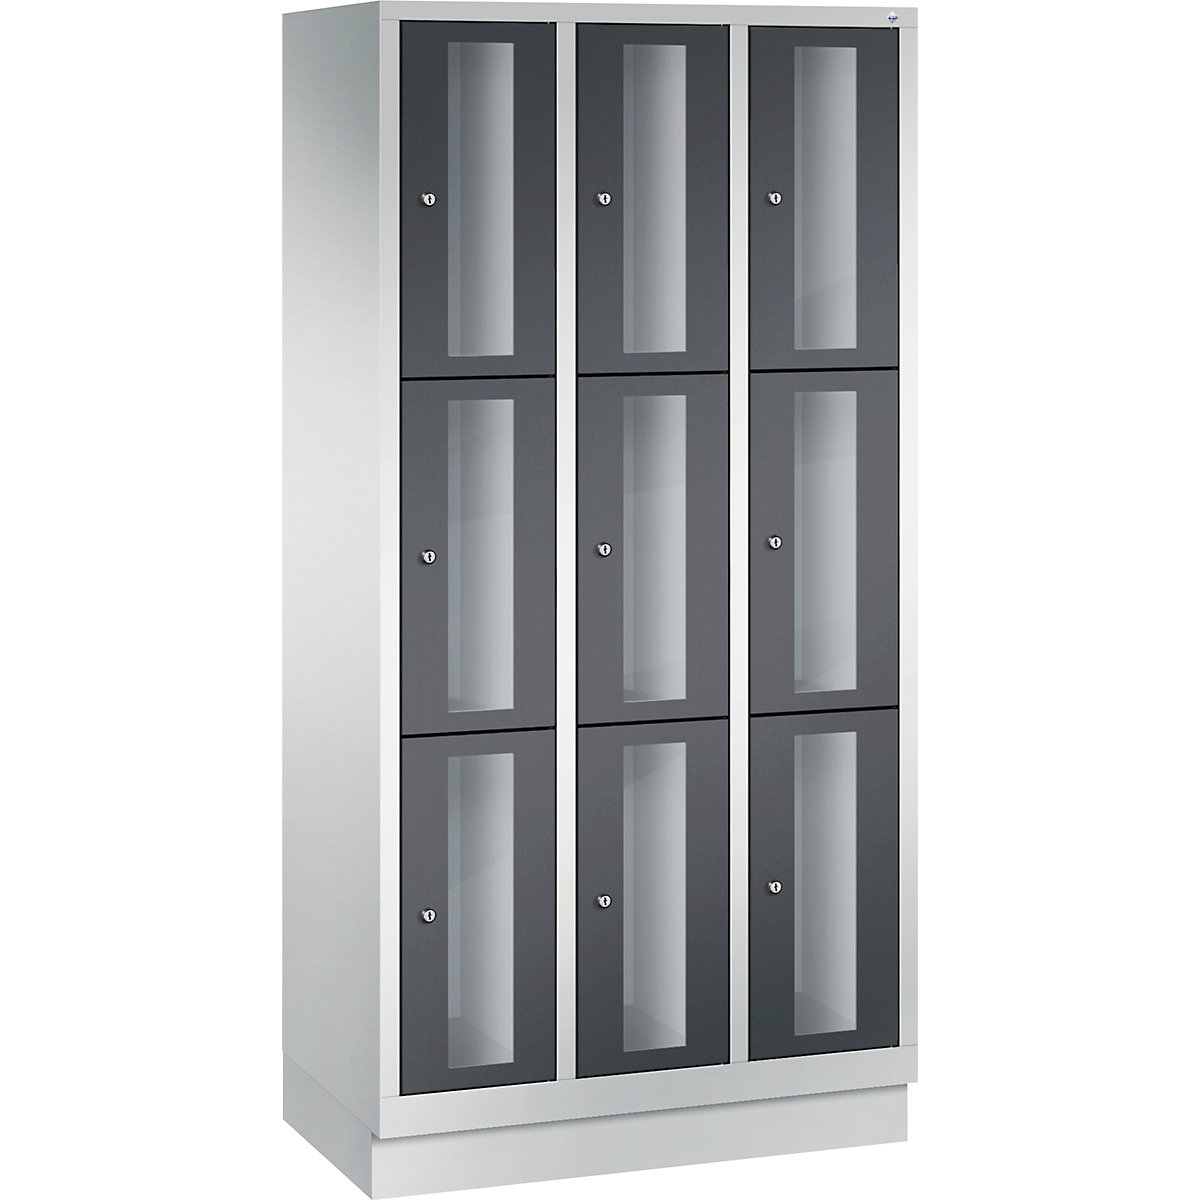 C+P – CLASSIC locker unit, compartment height 510 mm, with plinth, 9 compartments, width 900 mm, black grey door